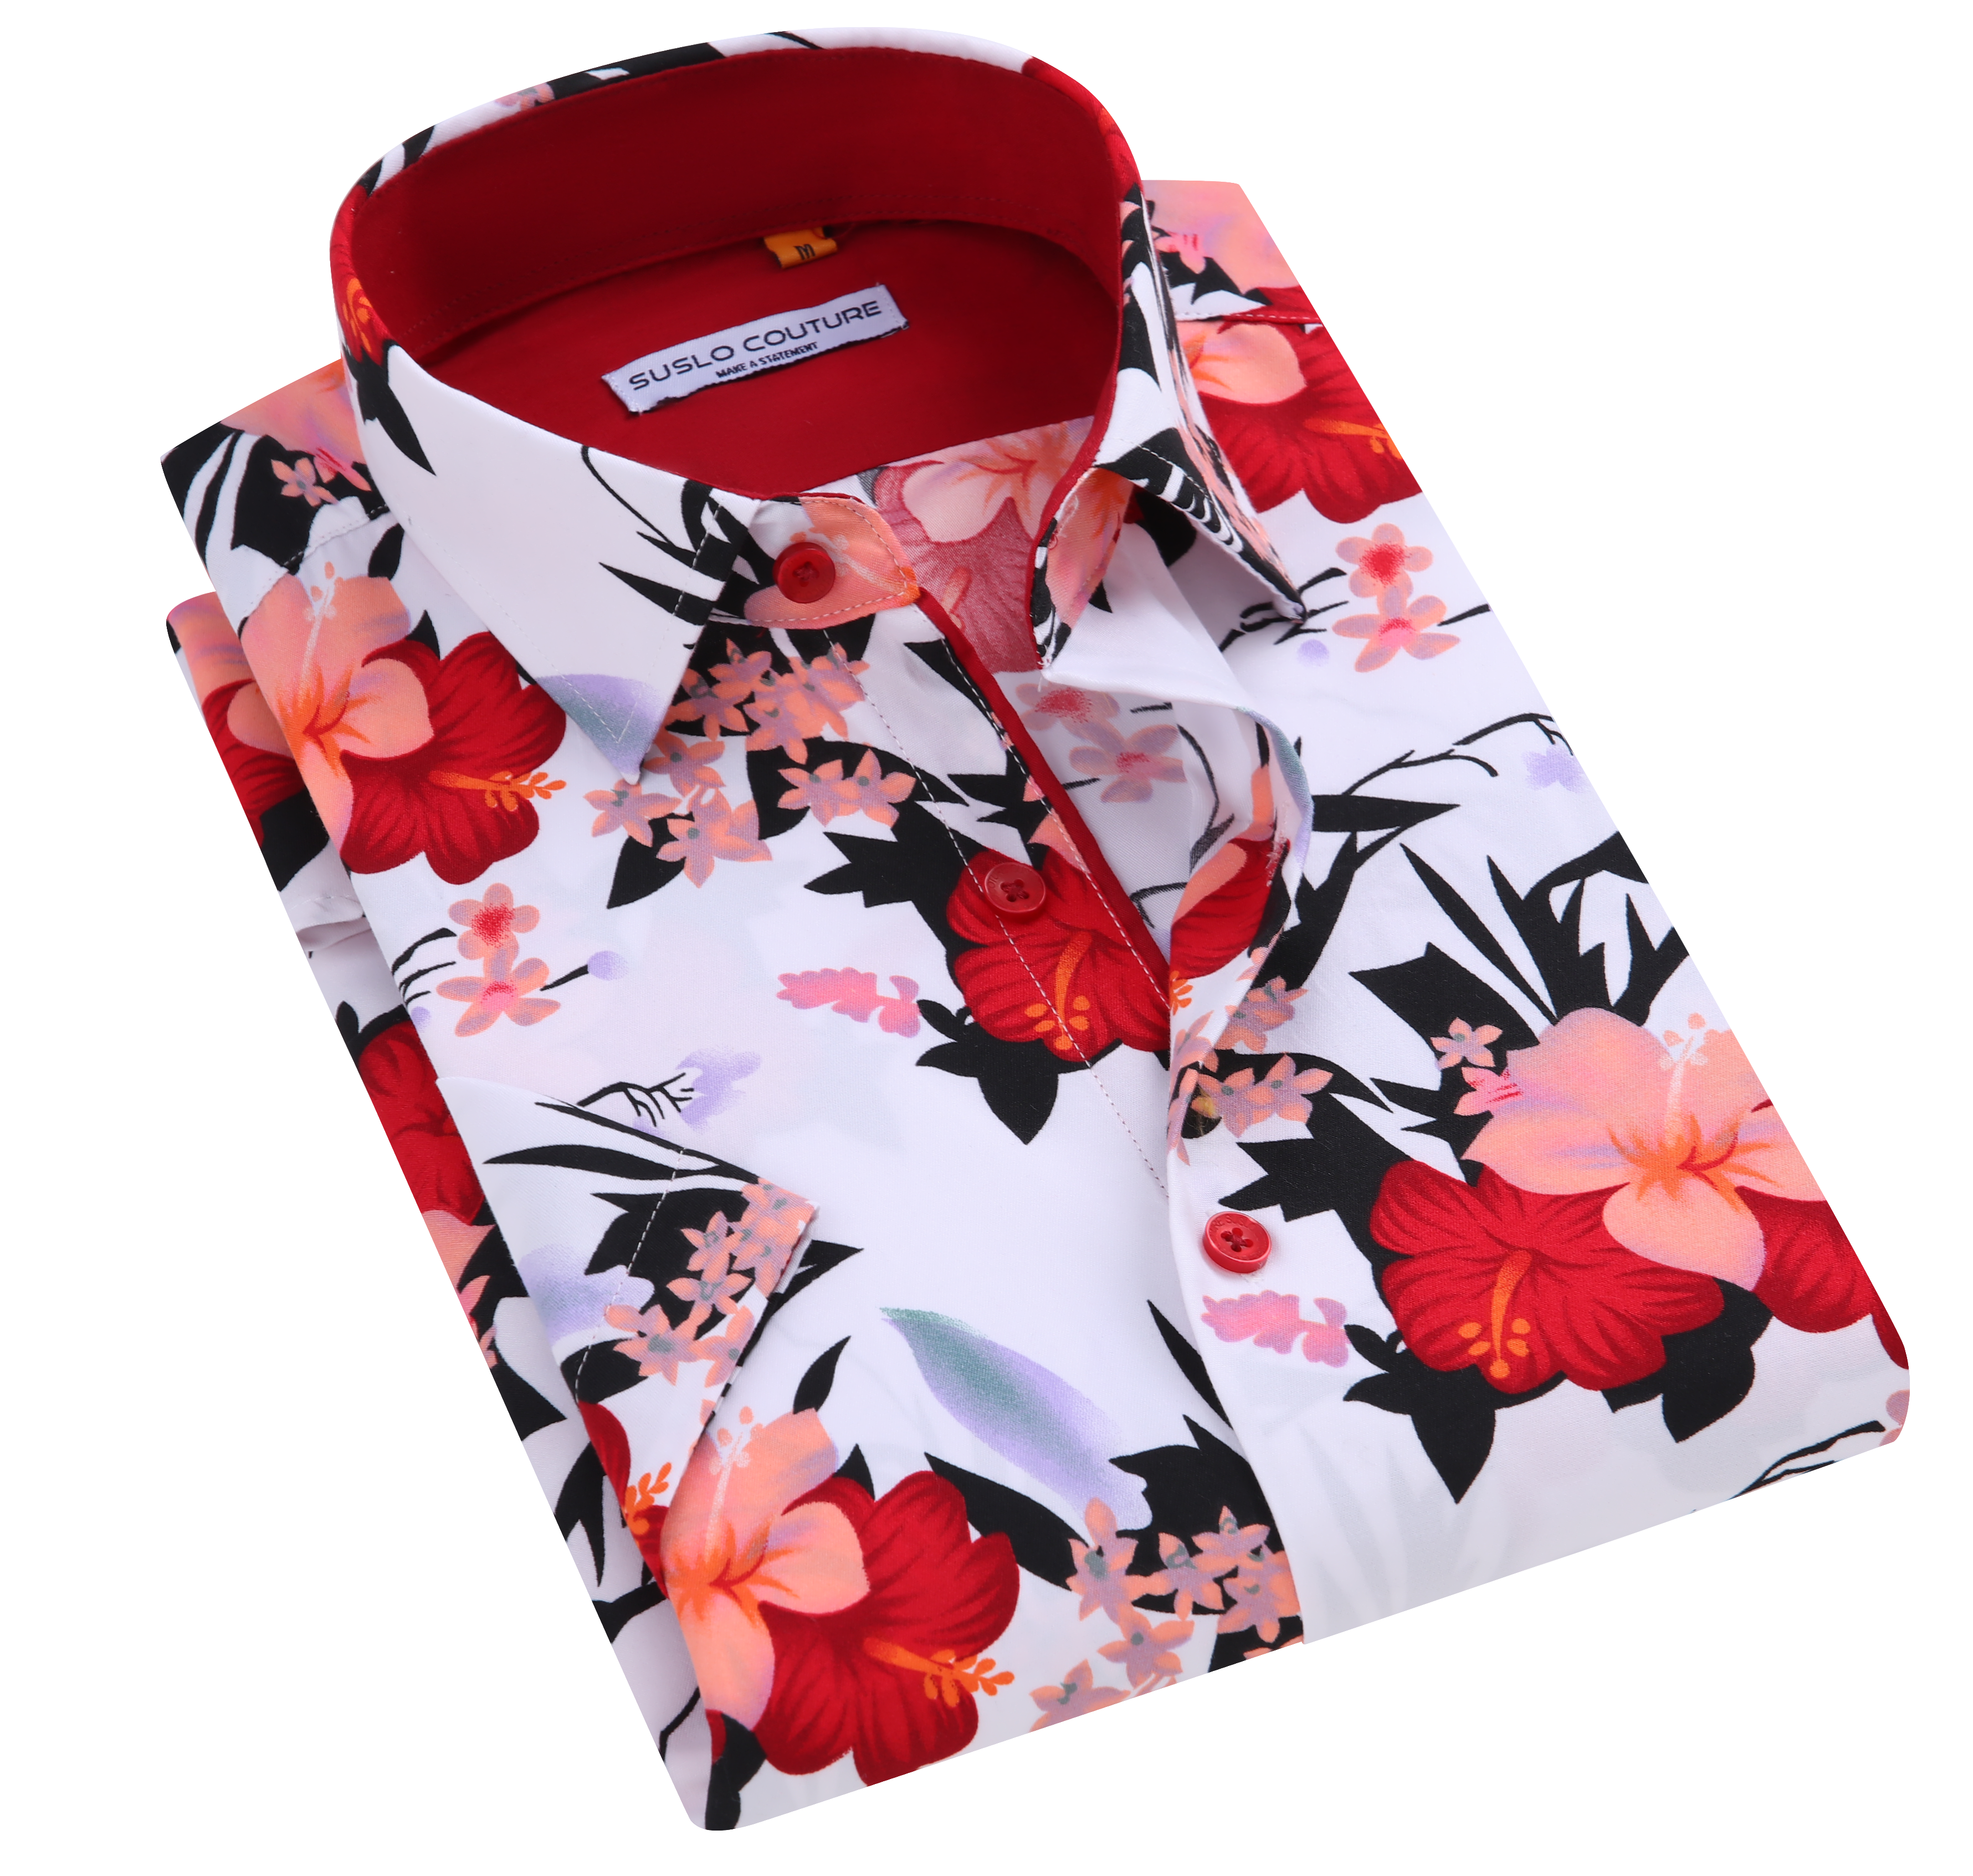 Suslo Floral Printed Short Sleeve Shirt (SC520-21-White)